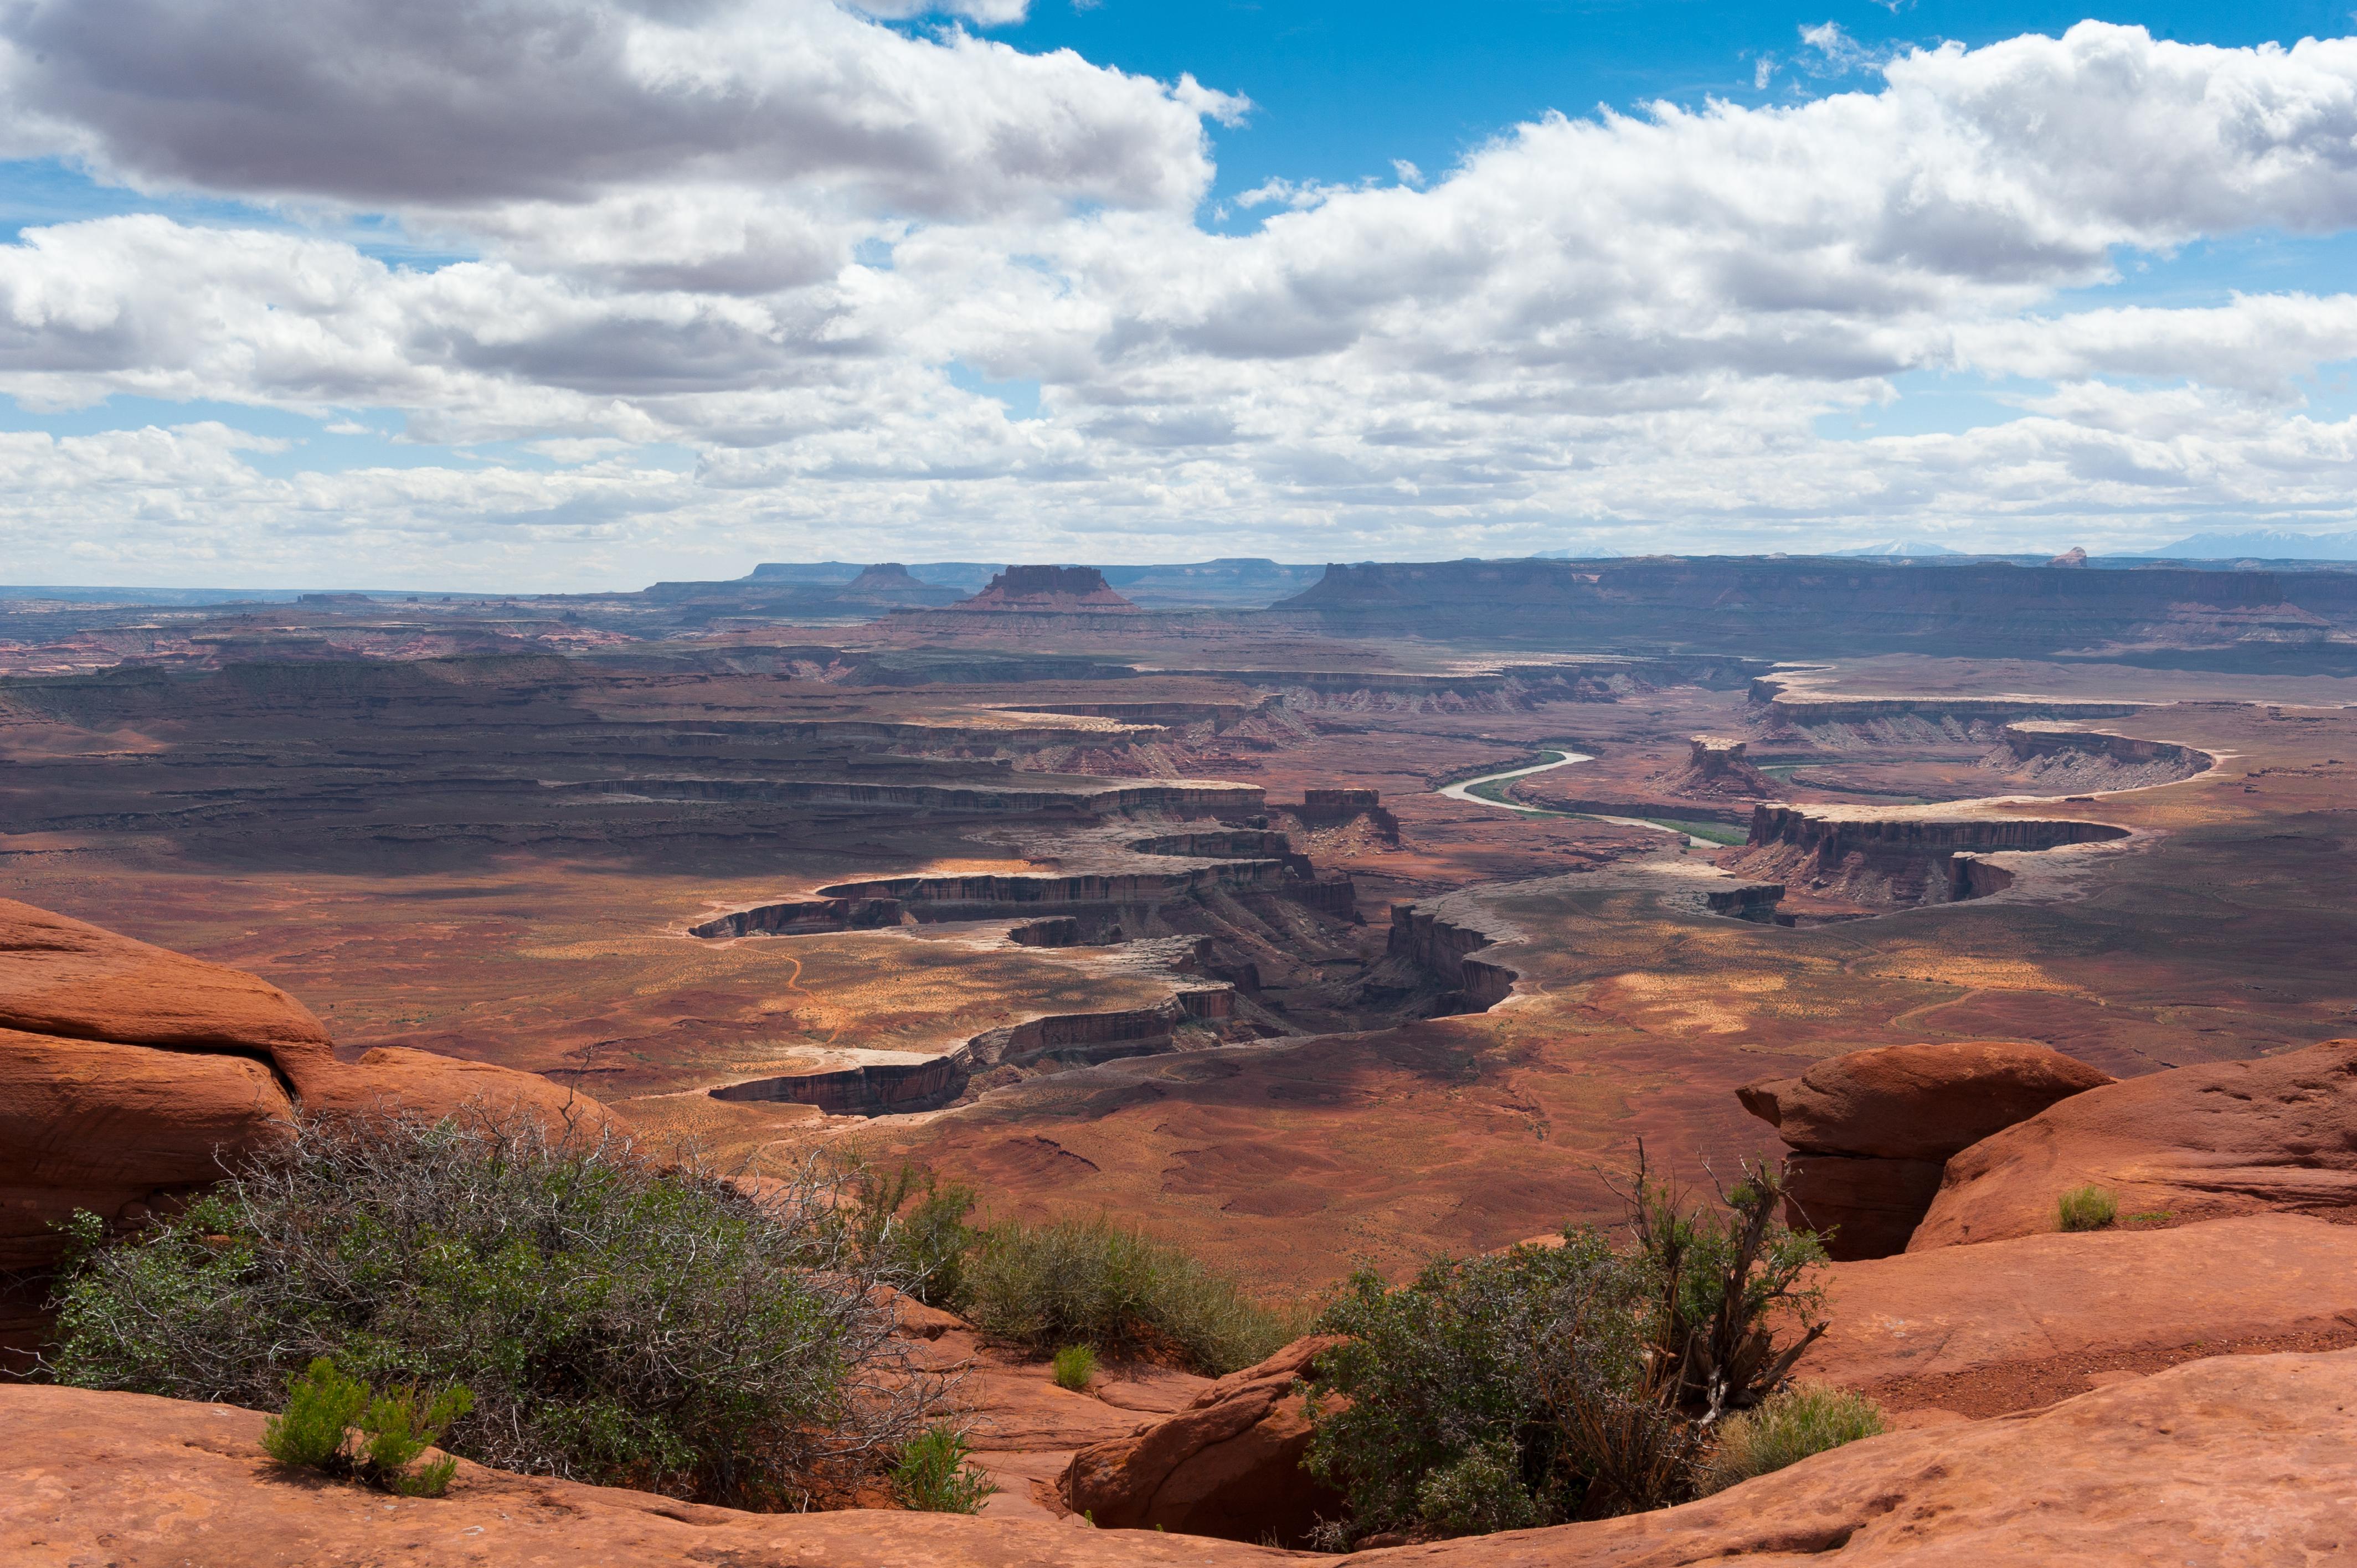 a vast view of canyons and buttes with a river winding through the center